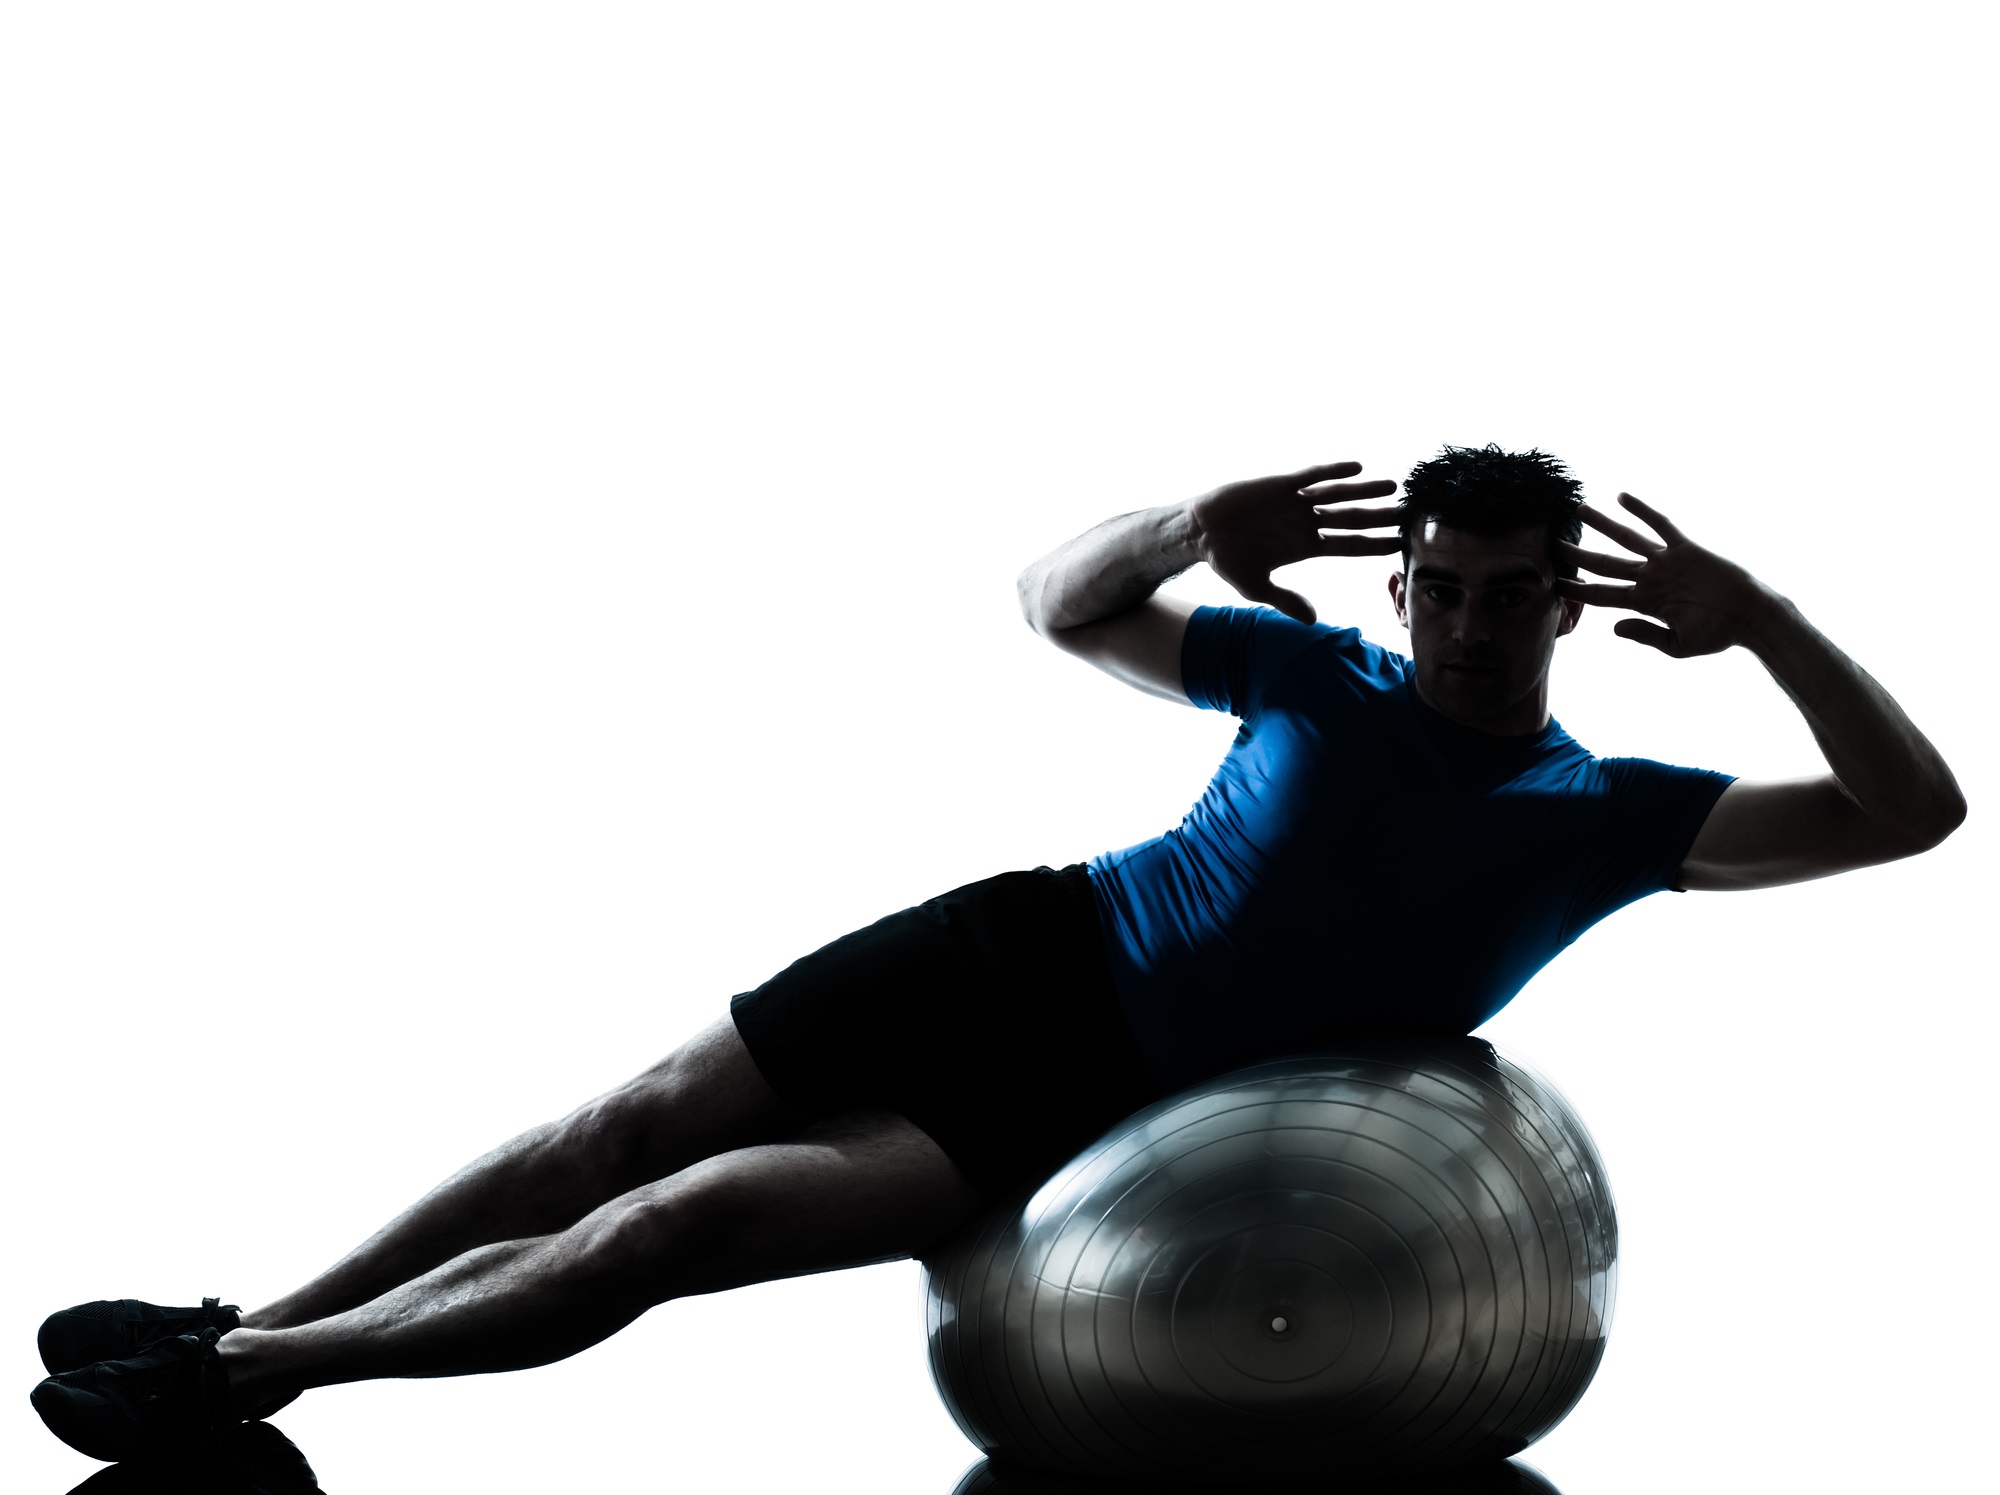 Person in blue shirt doing crunches on an exercise ball during a Pilates workout